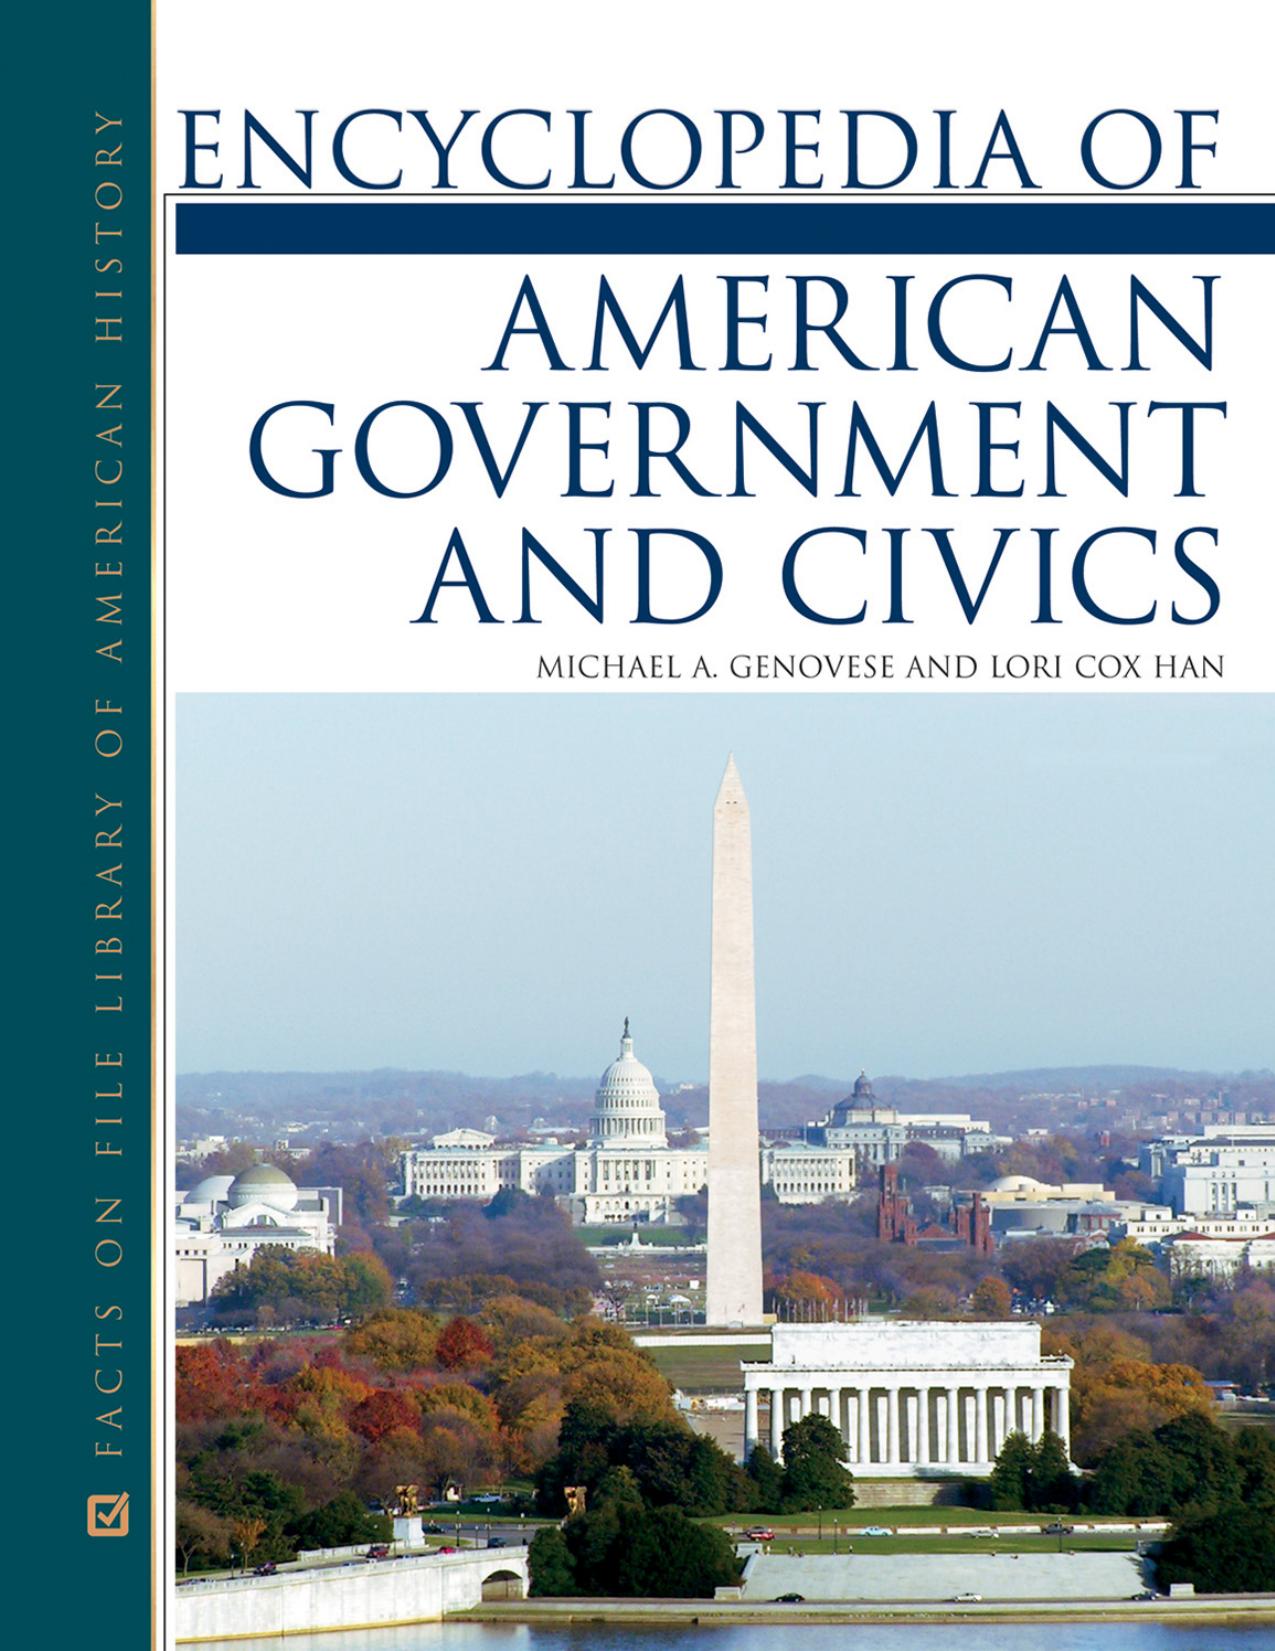 Encyclopedia of American Government and Civics